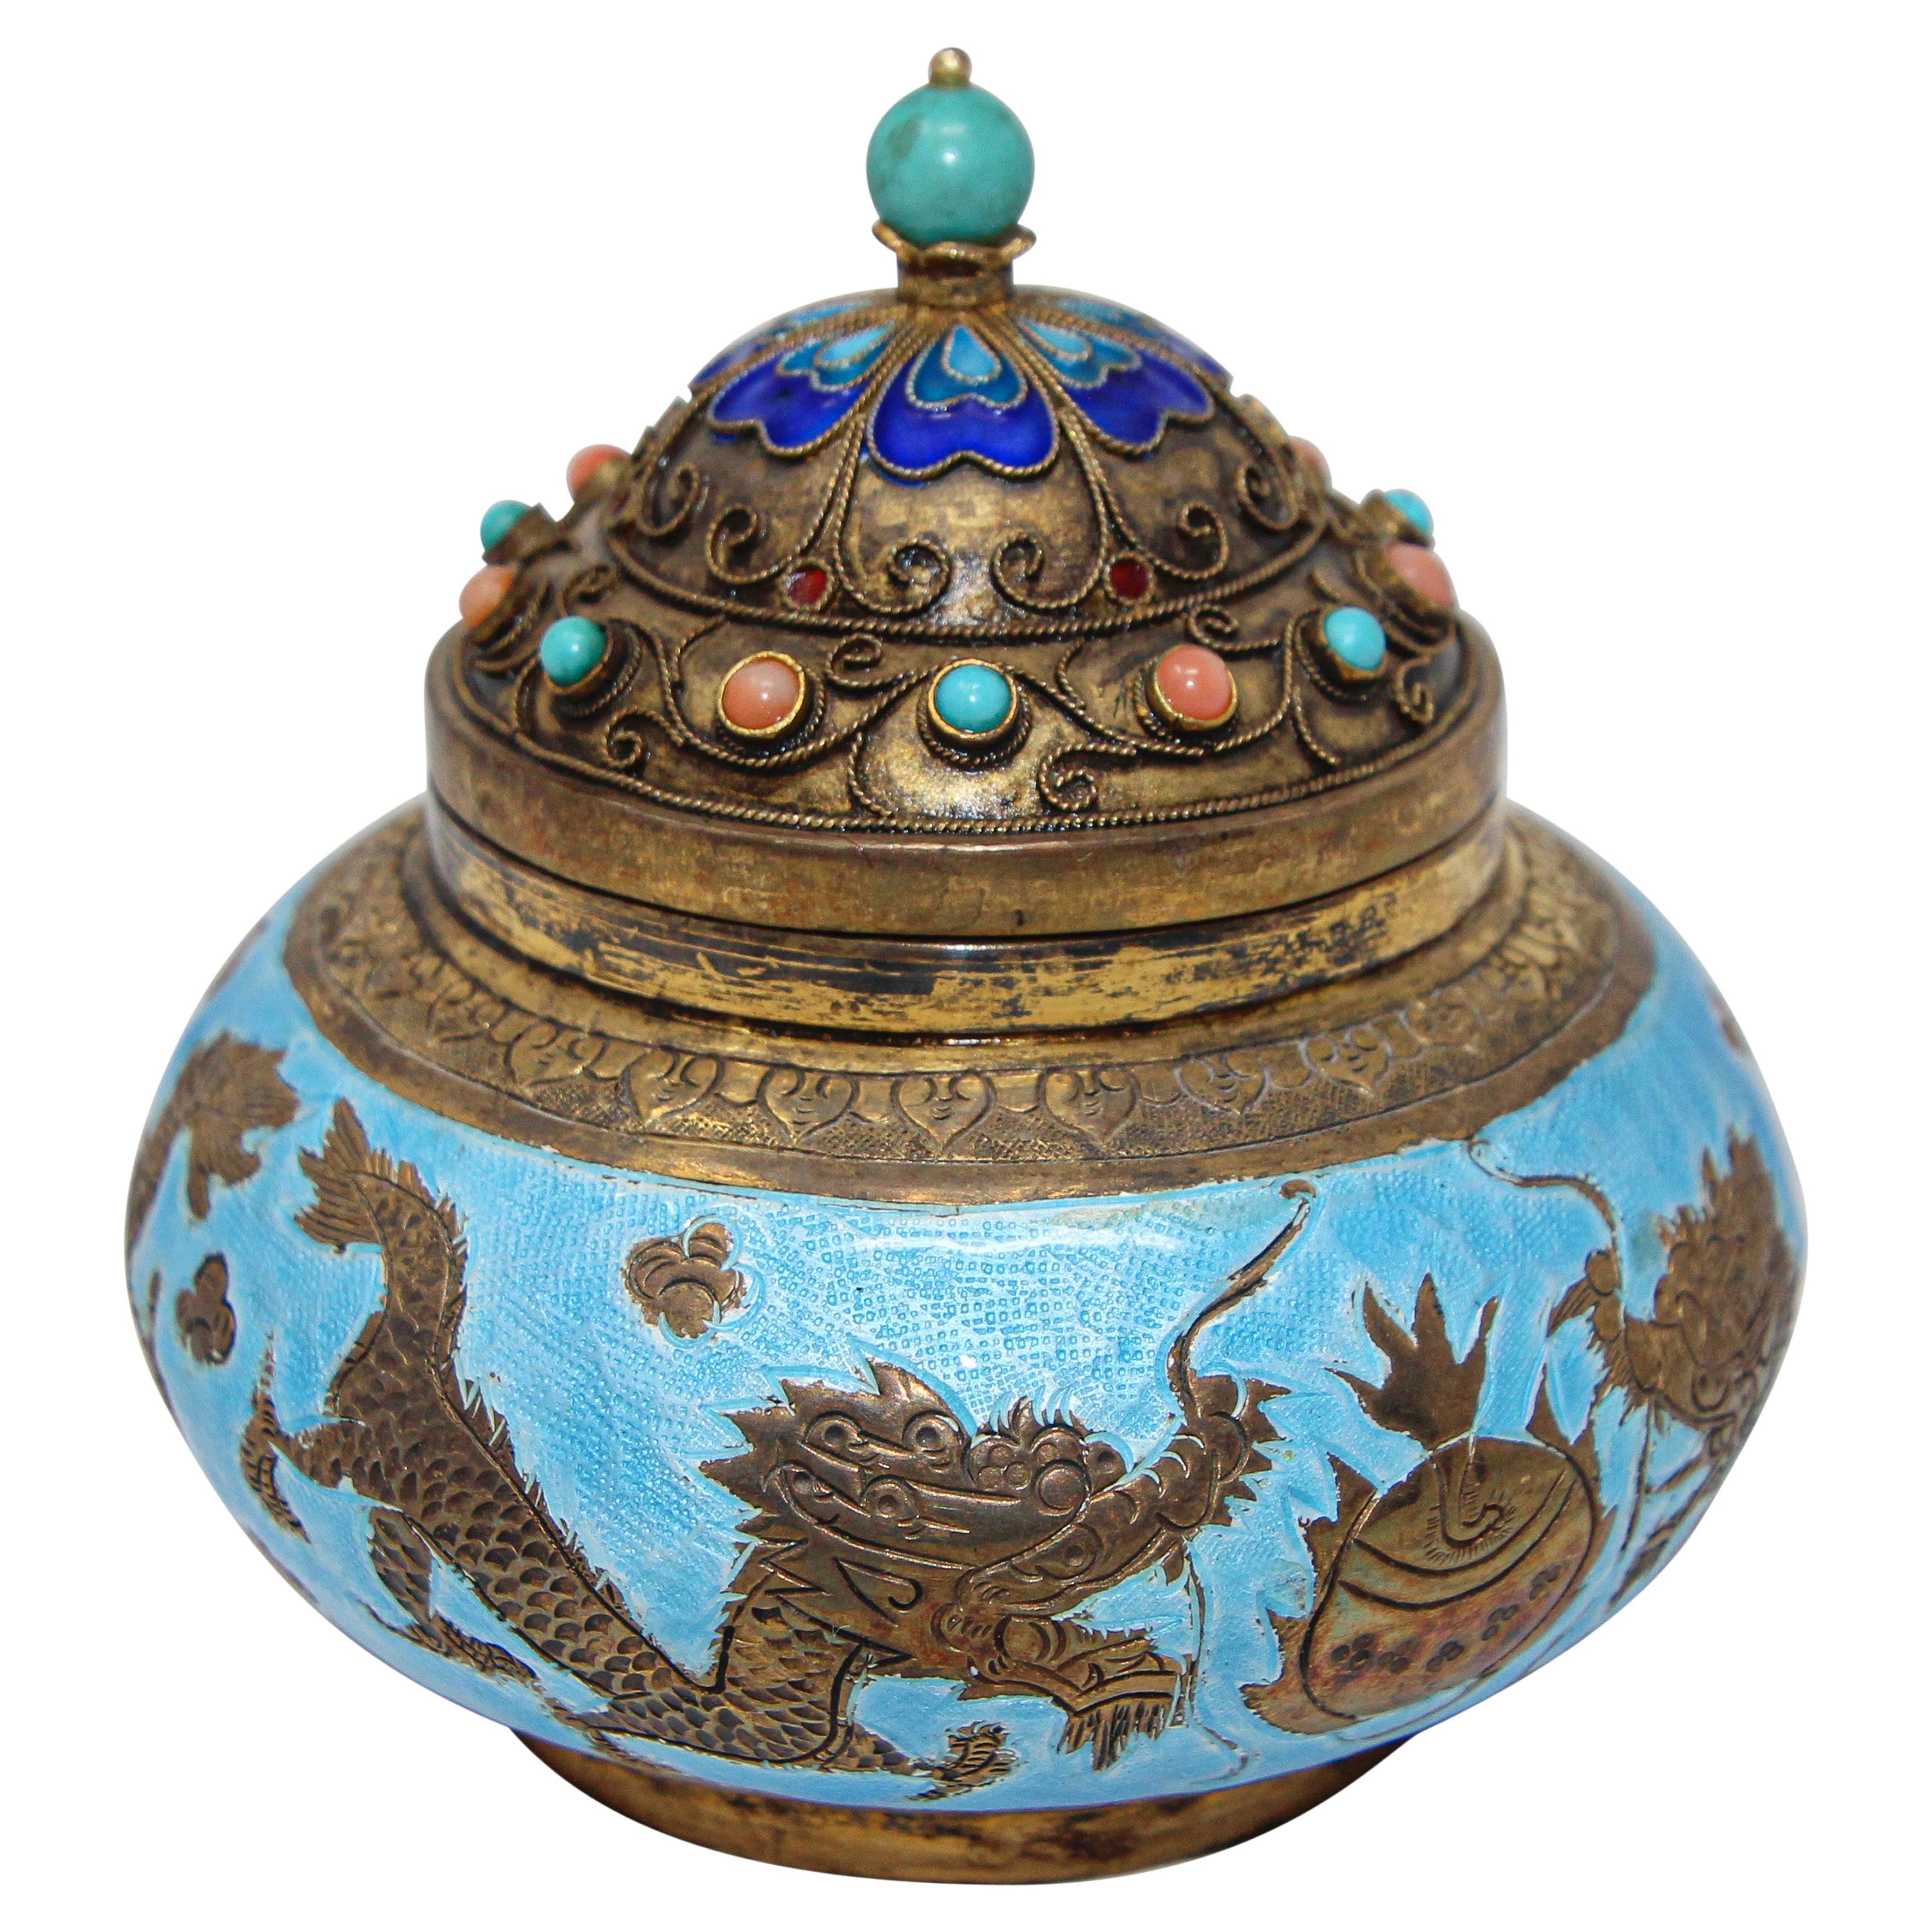 Chinese Export Brass Snuff Box with Turquoise Enamel Dragons and Beads Inlaid